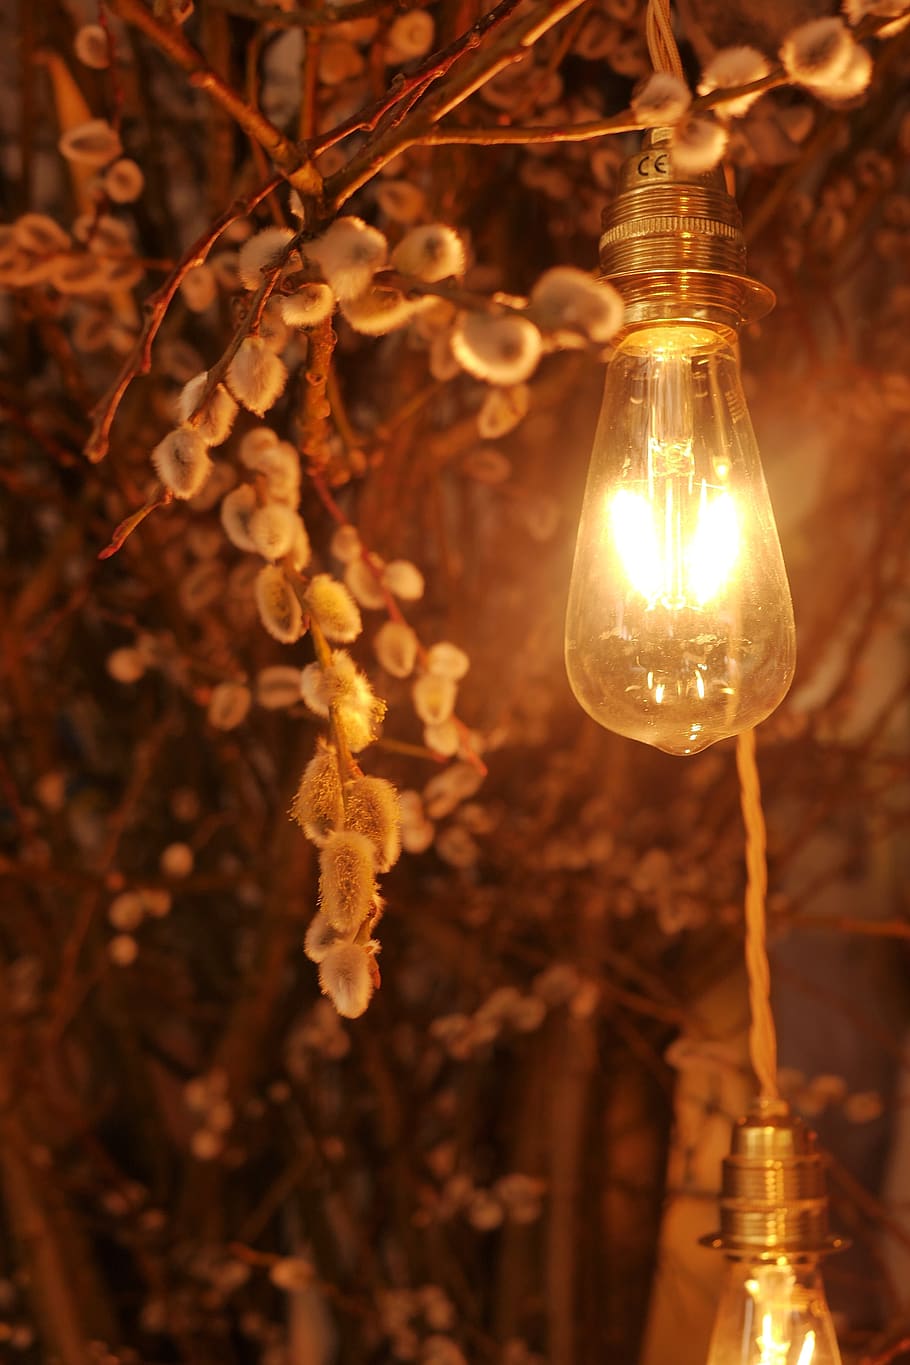 decoration, light bulb, lighting equipment, electricity, illuminated, focus on foreground, close-up, hanging, glowing, light